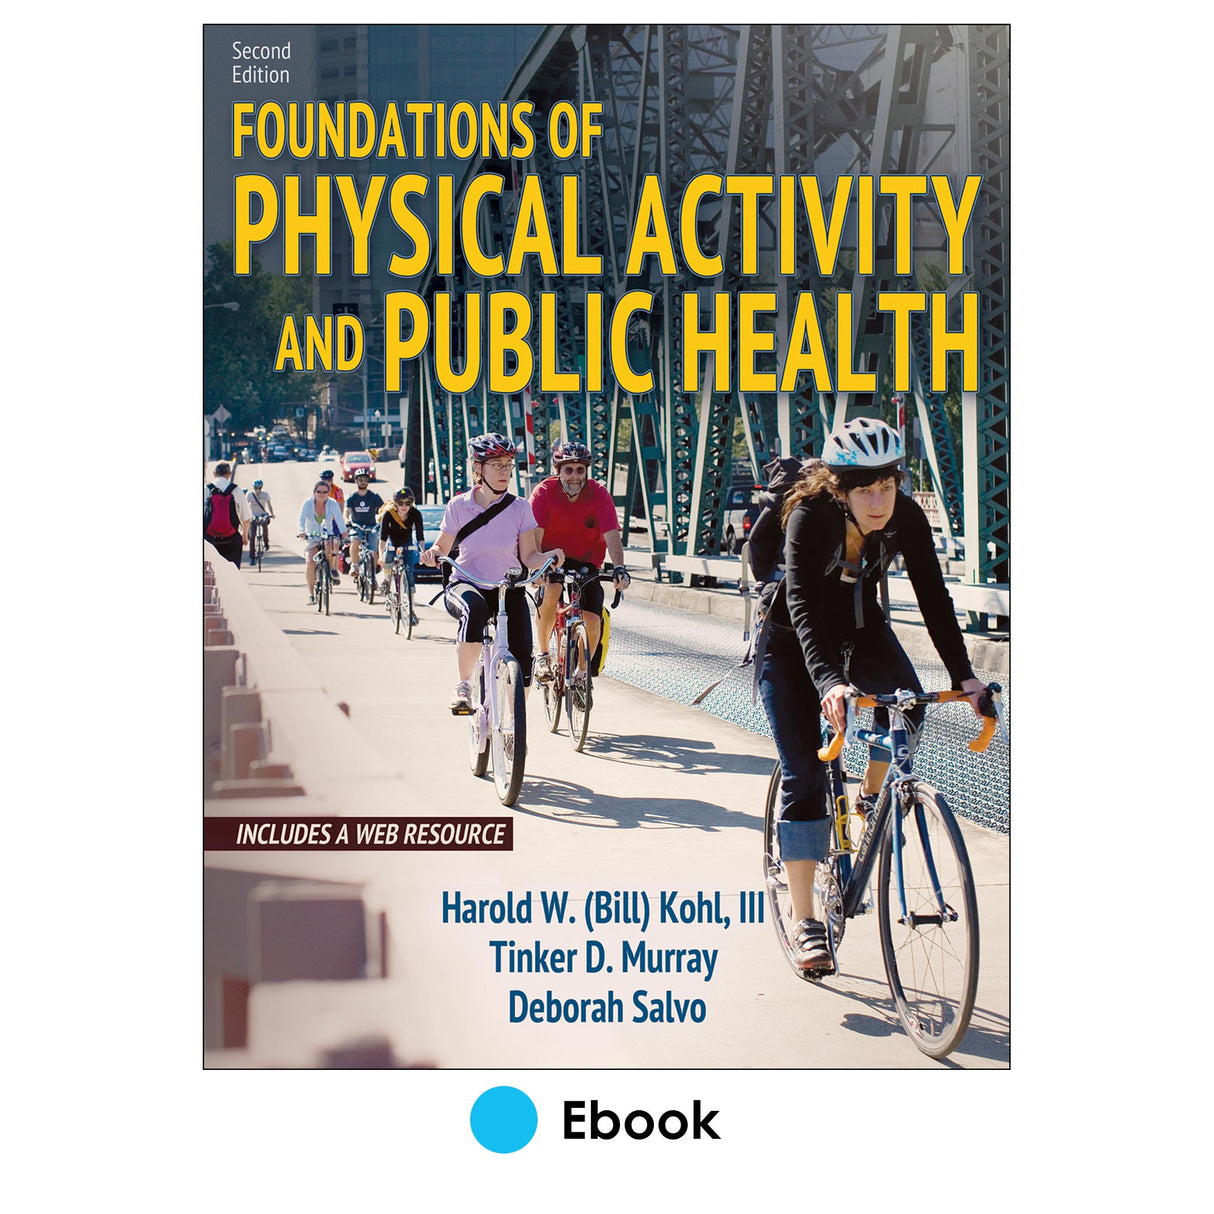 Foundations of Physical Activity and Public Health 2nd Edition With Web Resource epub